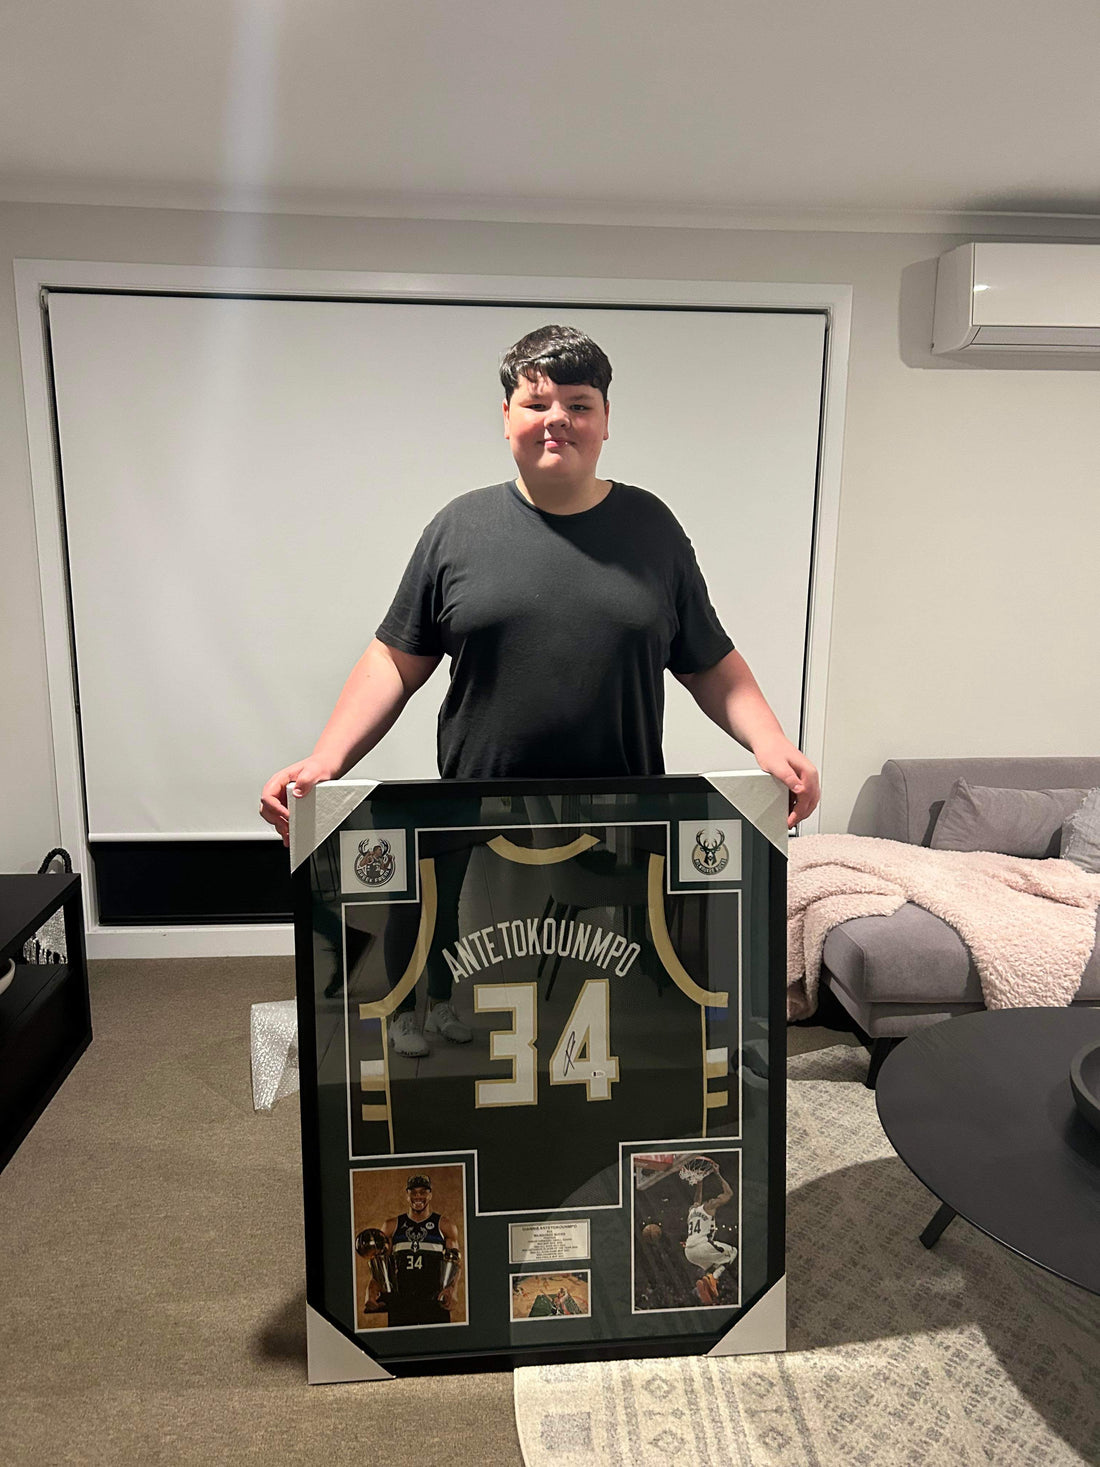 Dreams, Dedication, and a Giannis Antetokounmpo Jersey: A Young Fan's Journey to Own a Piece of Memorabilia